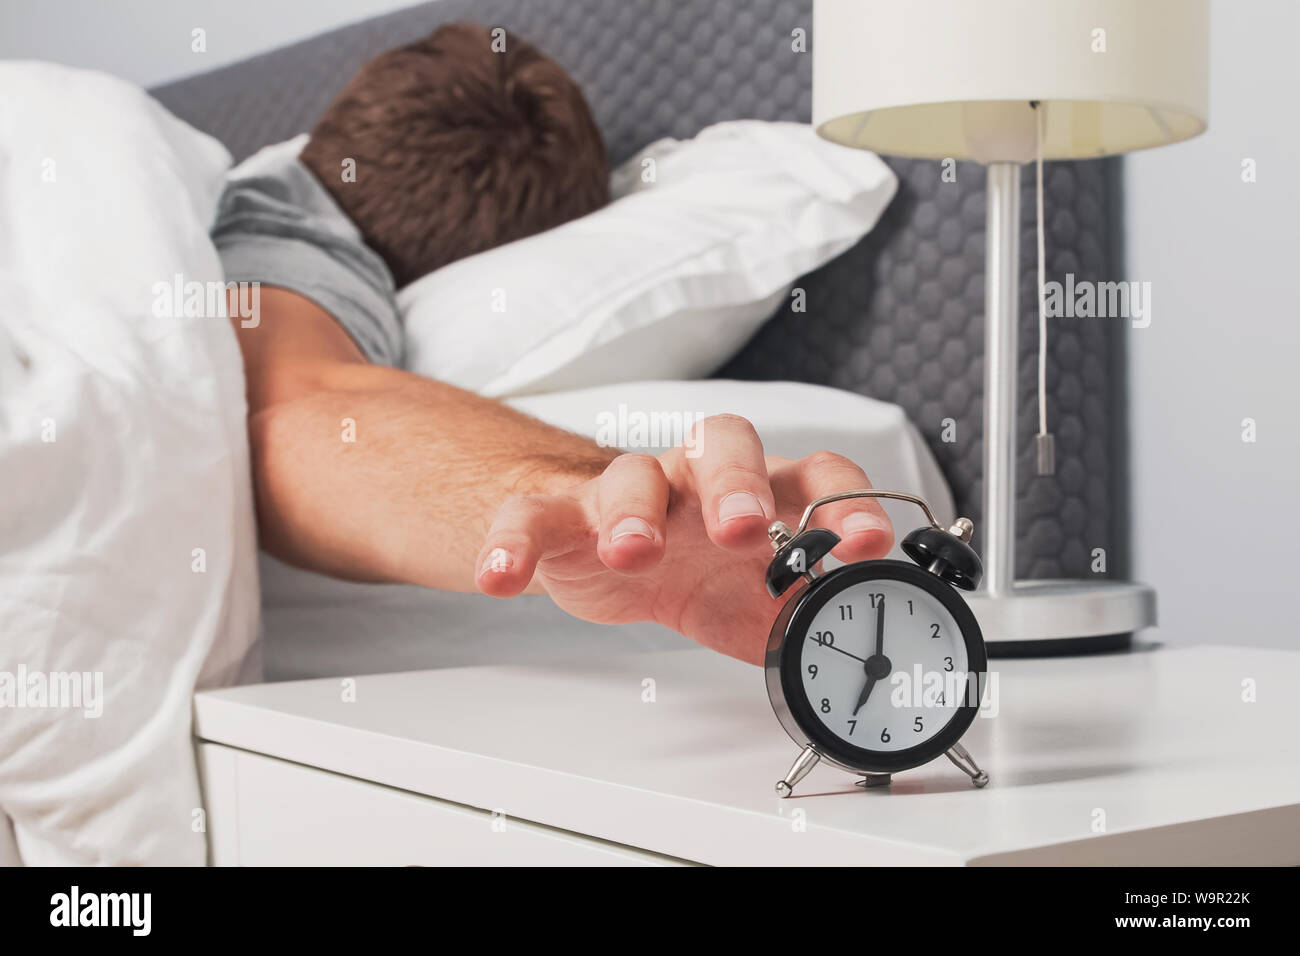 Man's hand reaching out alarm clock on the nightstand early in the morning. Morning routine. Stock Photo